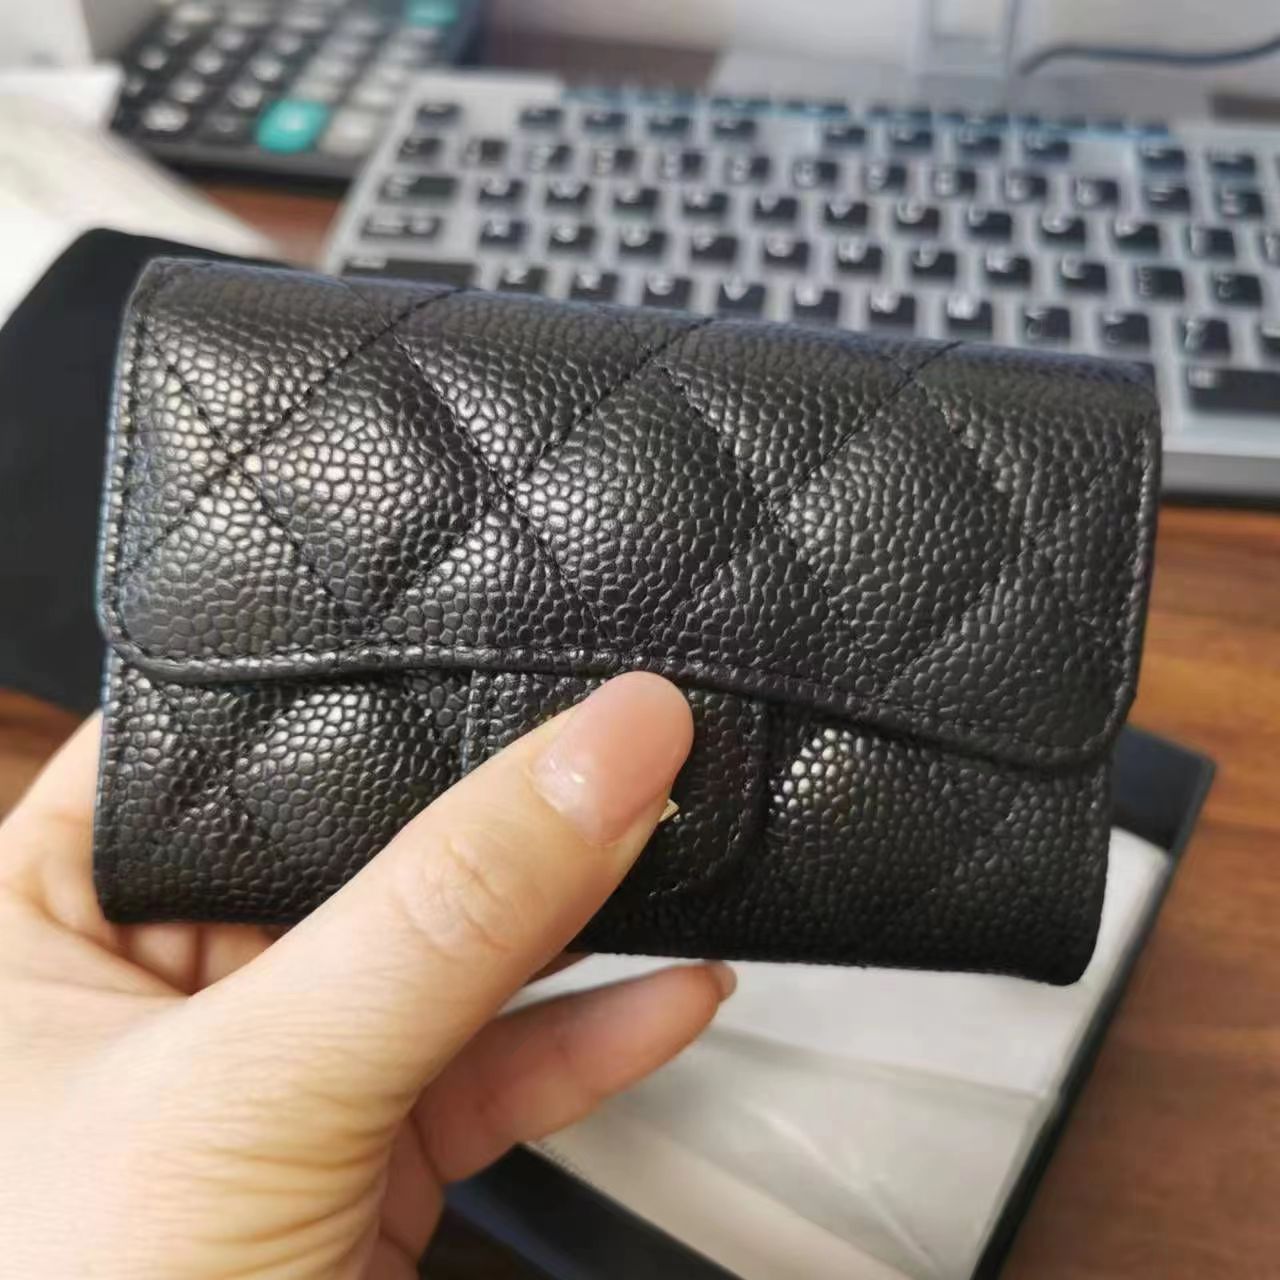 Anniv Coupon Below] Classic Designer Genuine Leather Card Holder Wallet Luxury Credit Cards Wallet Bag Fashion Womens Coin Mens Travel Documents Passport Holders From Ggdesignerbag, $13.48 | DHgate.Com